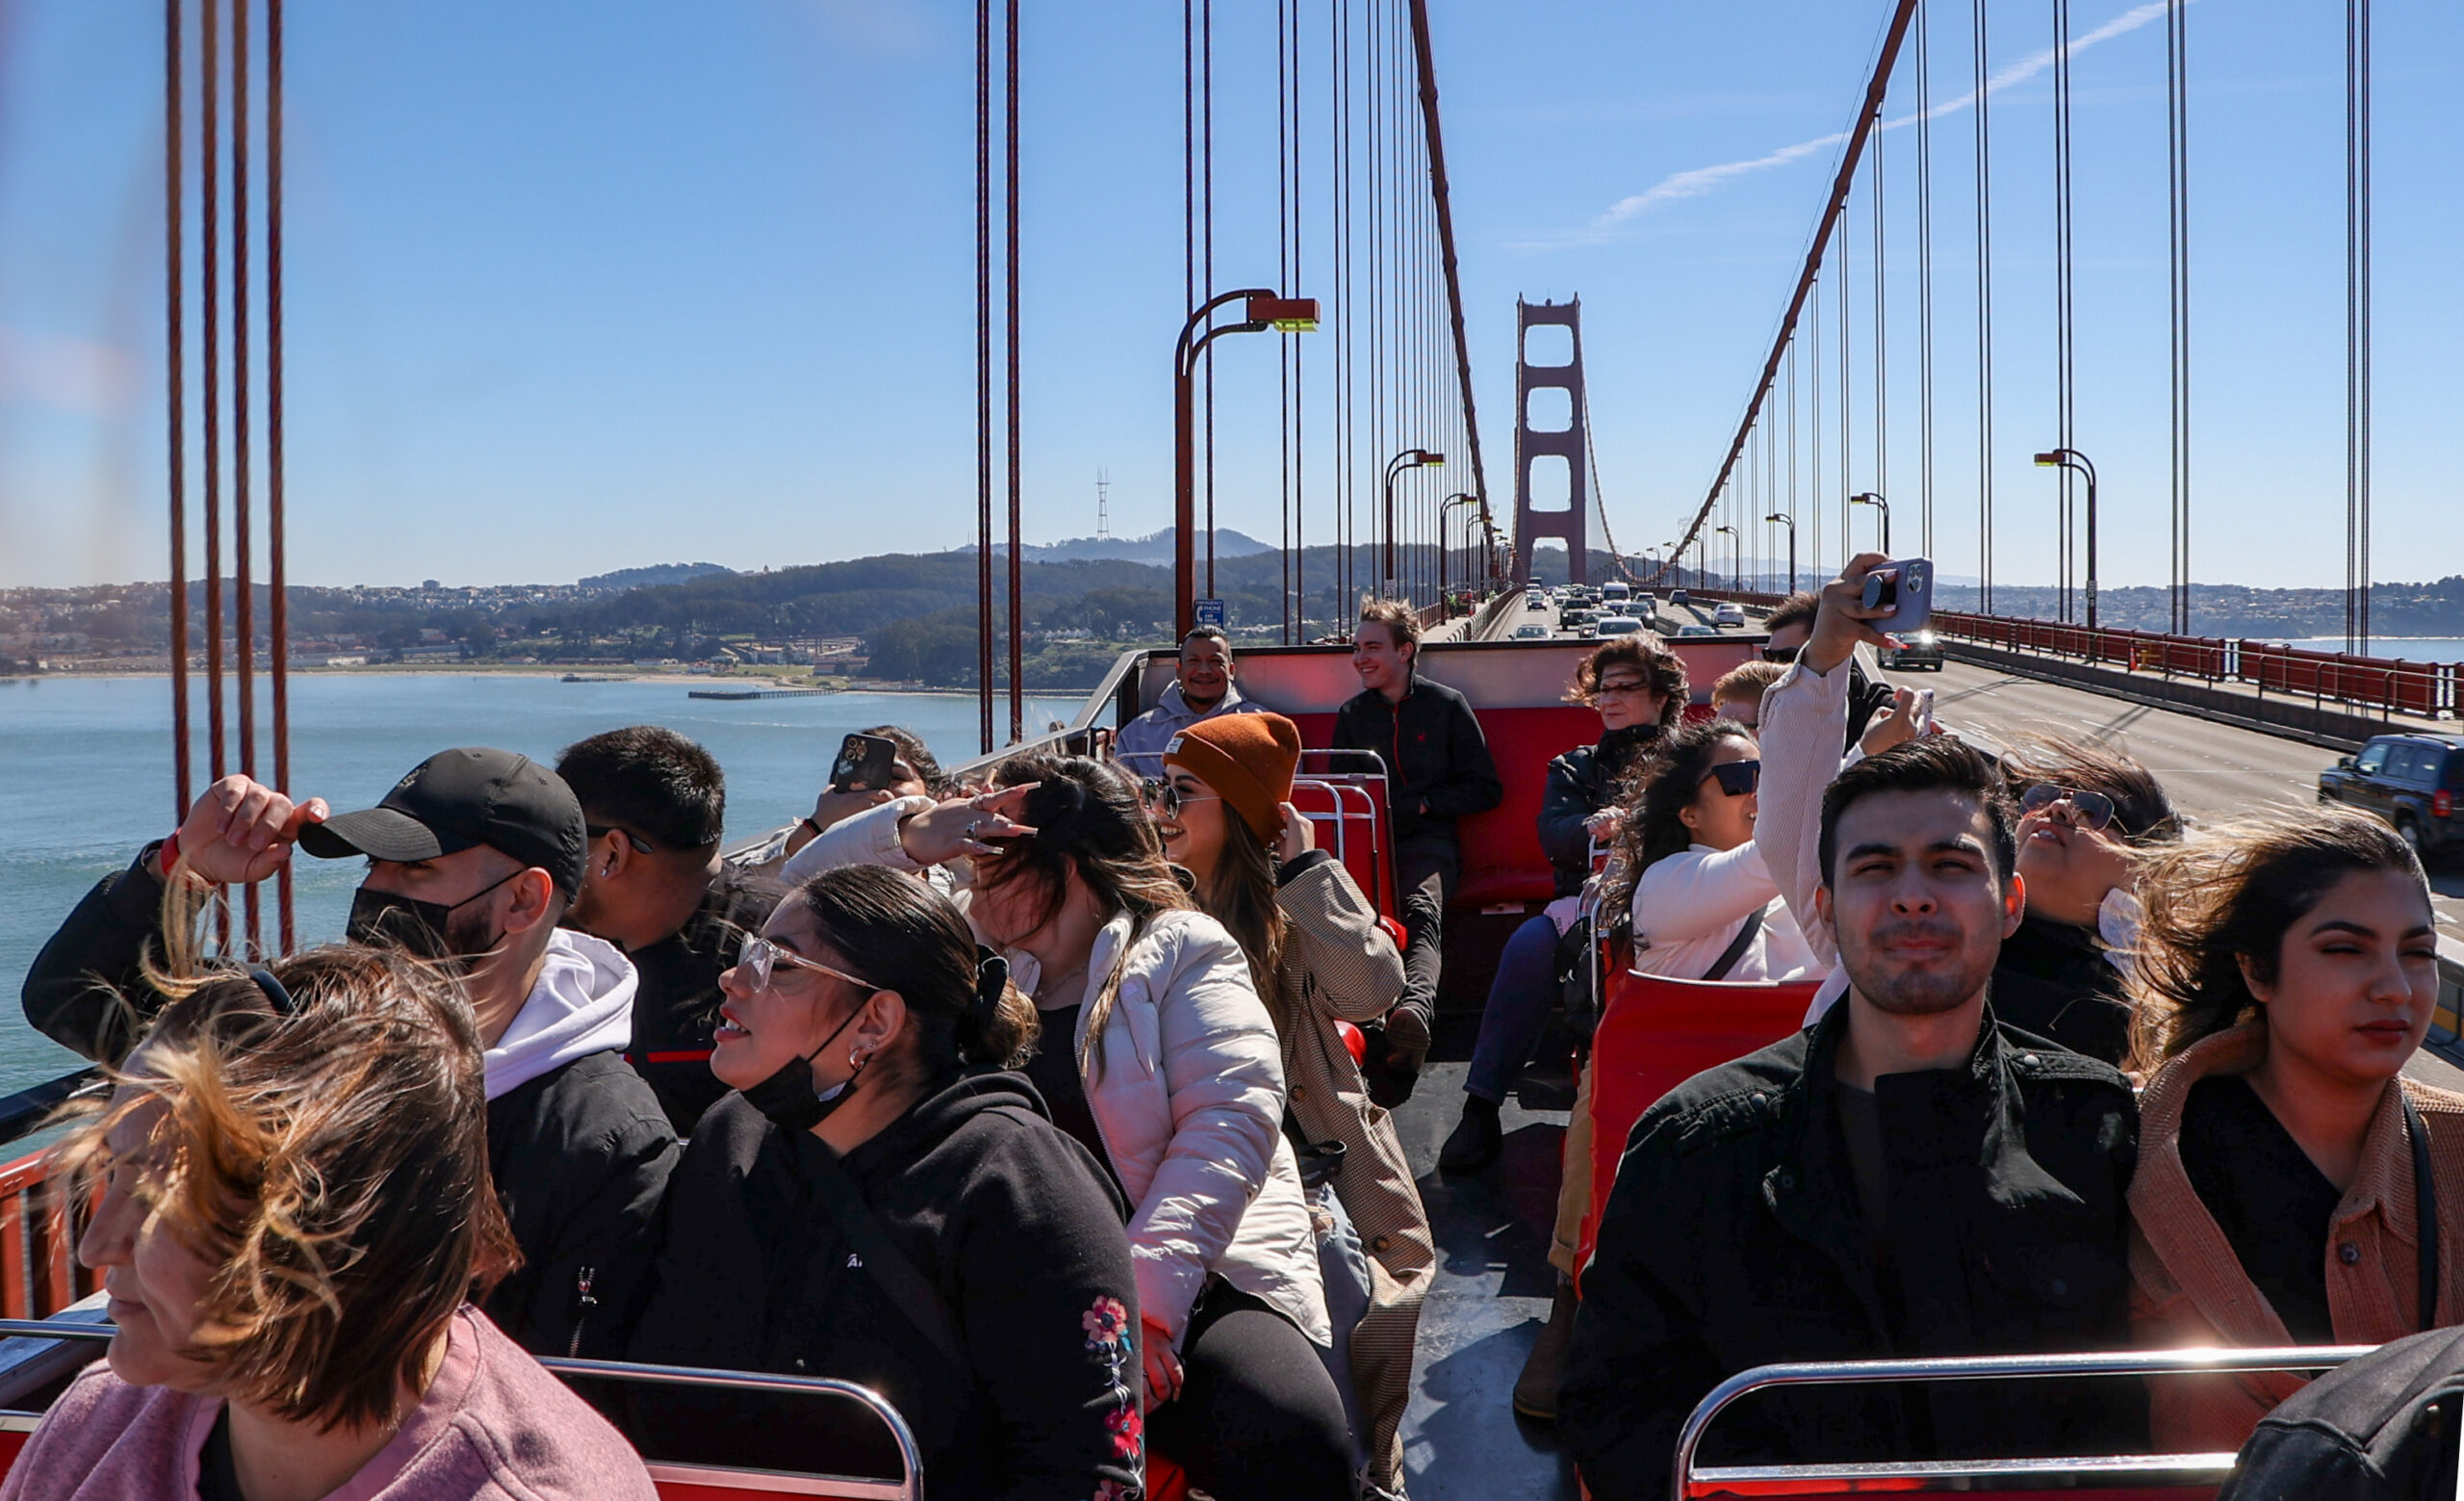 We rode a double-decker tour bus around SF. The trouble isn’t ‘what’ we saw but ‘who’ we didn’t see